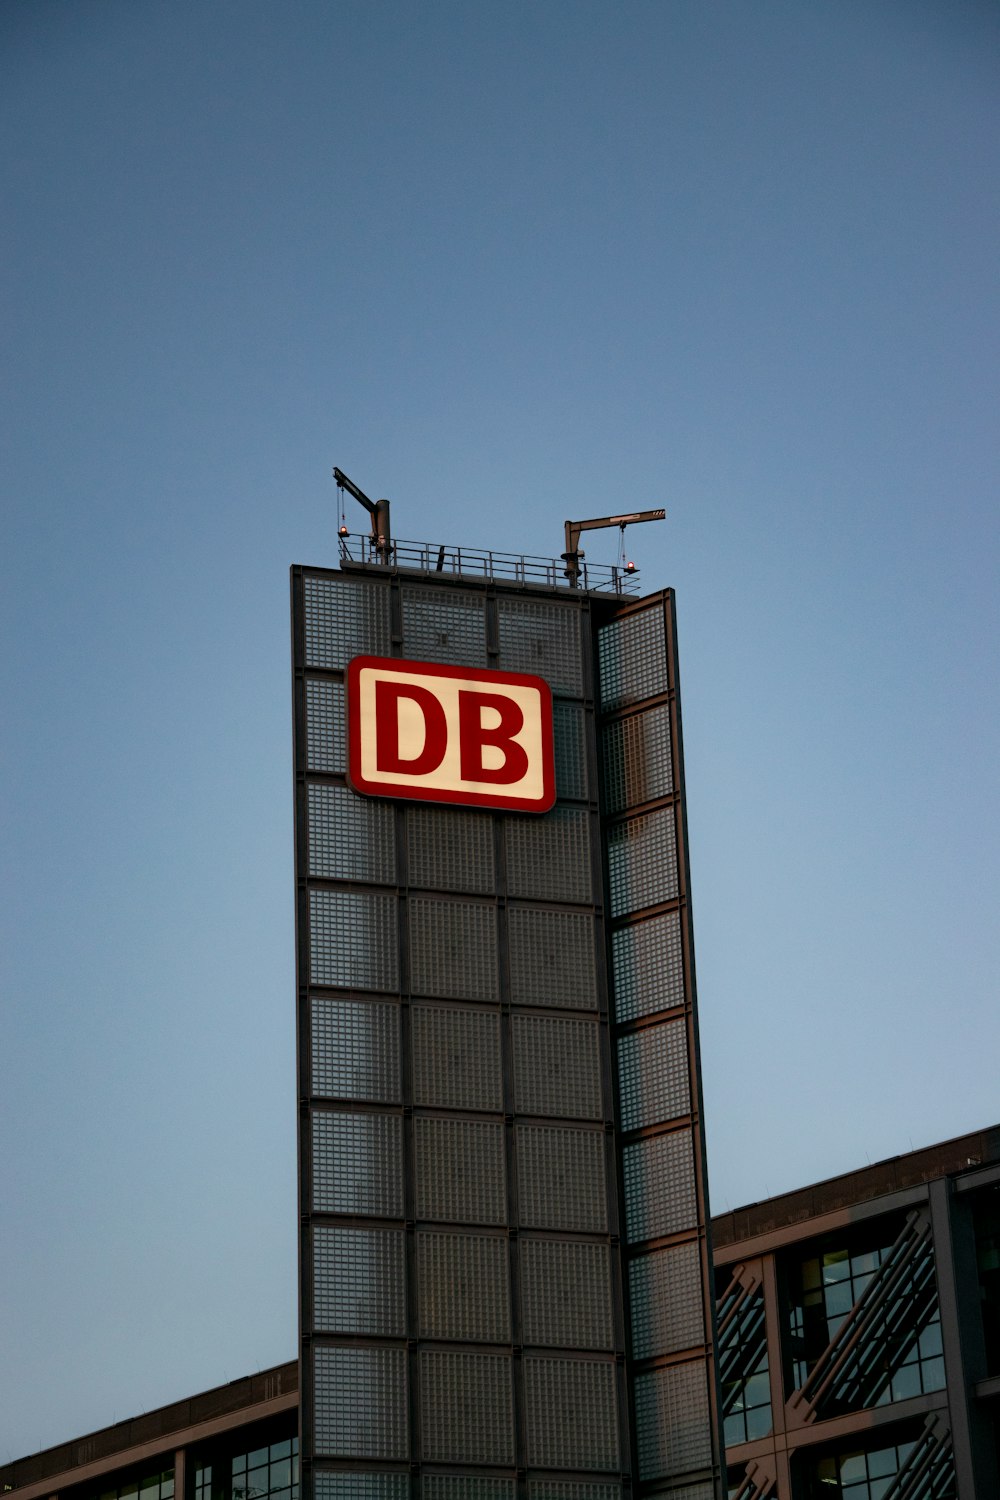 red and white DB signage